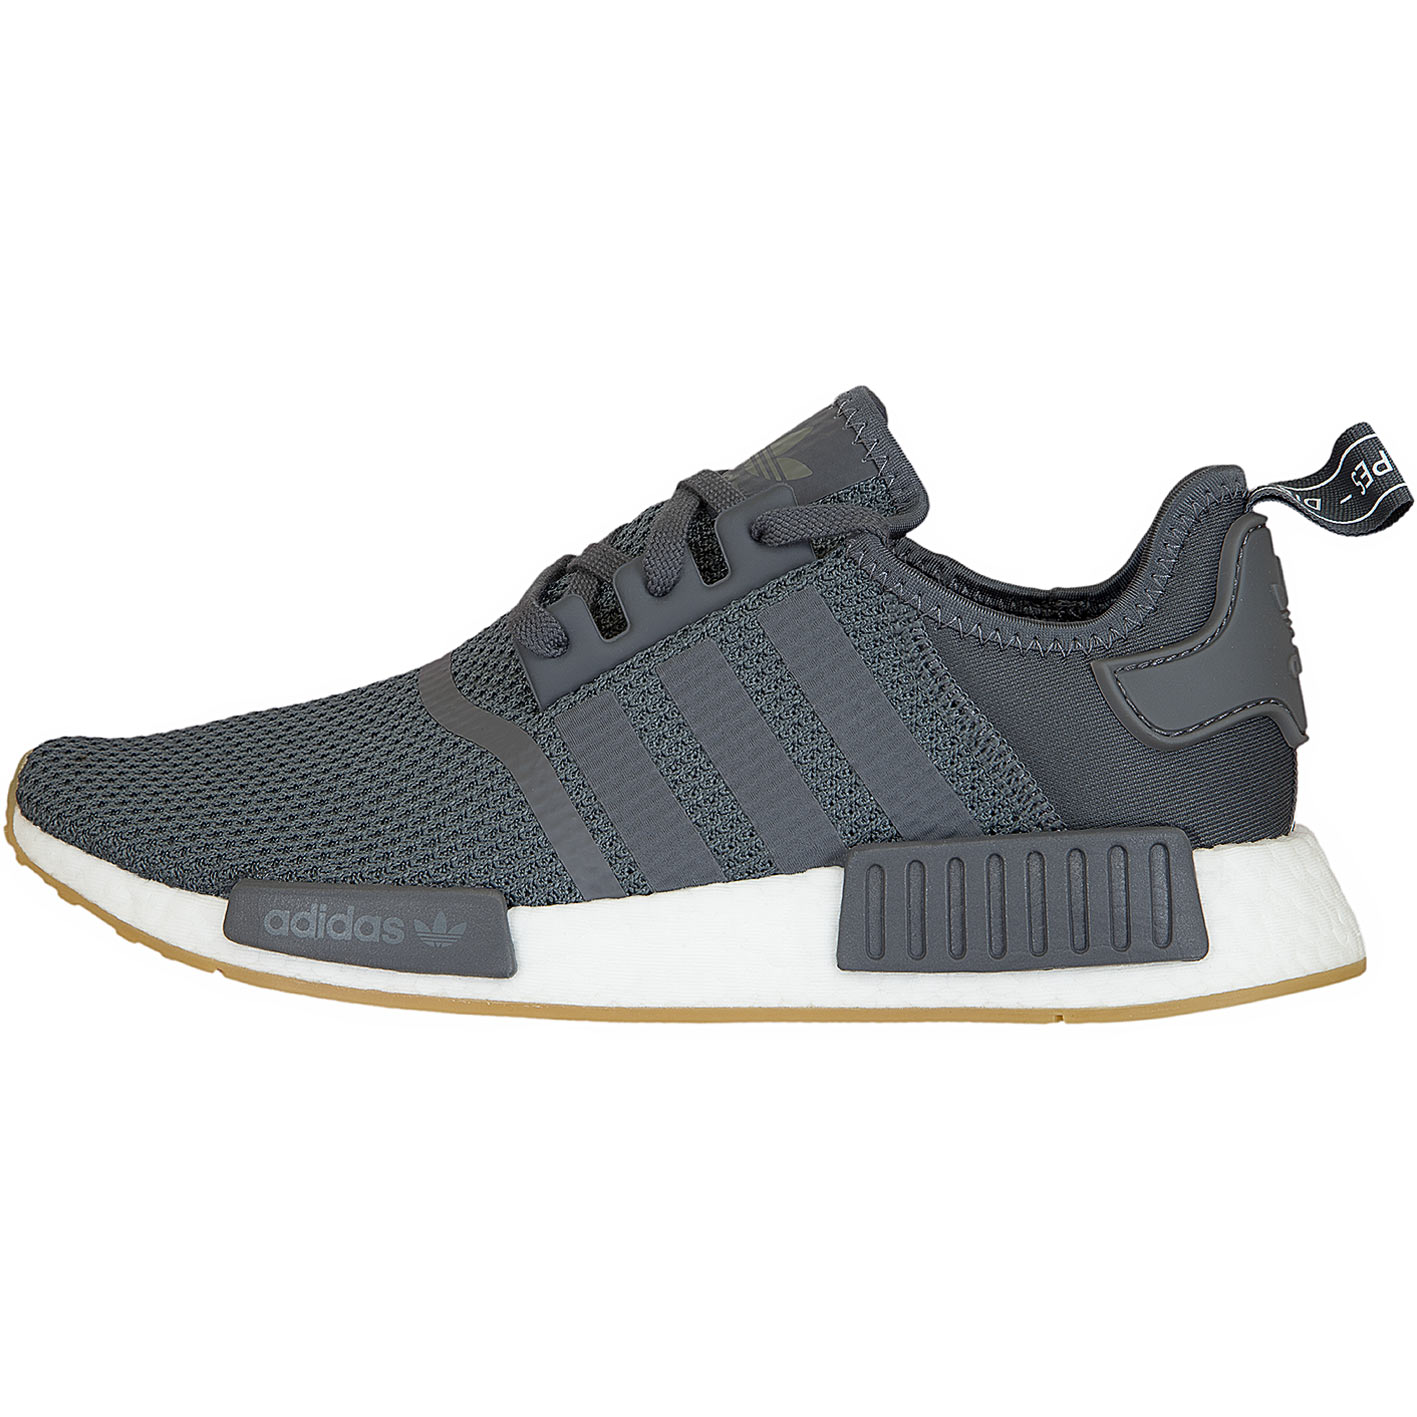 47 Fakten  ber Adidas Nmd R1 Grau All styles and colors available in  